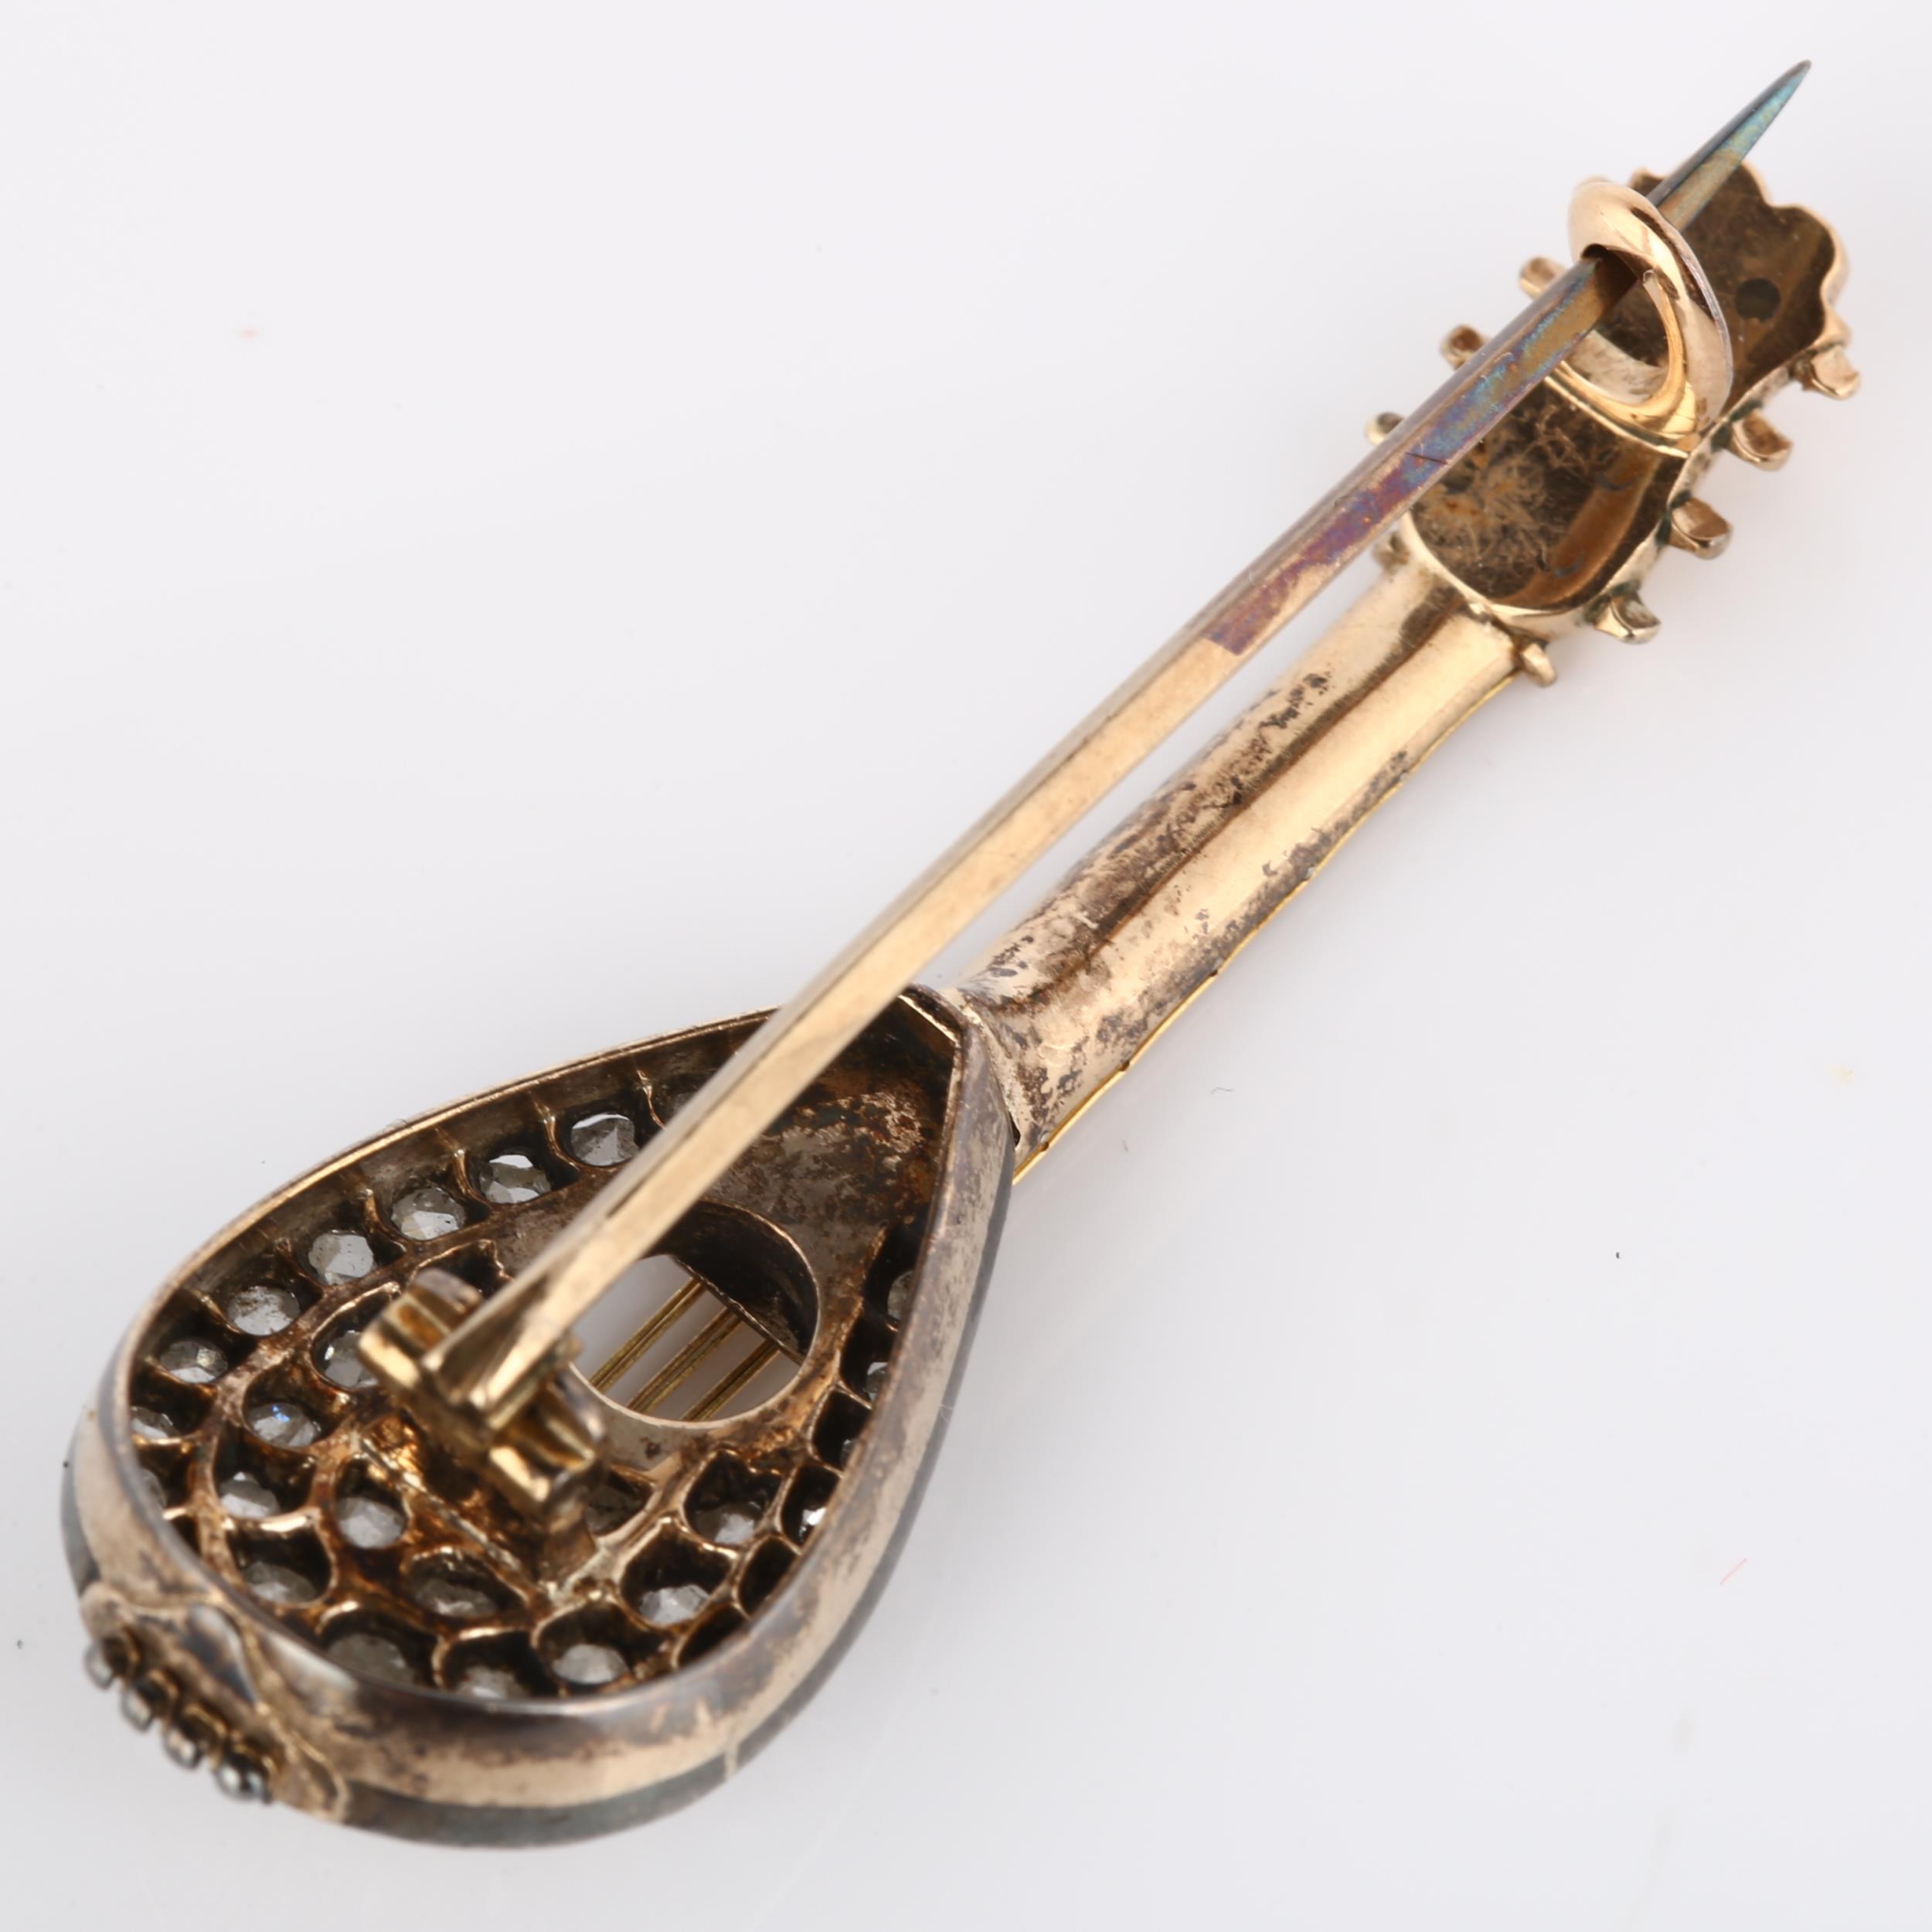 An Antique novelty diamond mandolin musical instrument brooch, circa 1900, unmarked rose gold and - Image 3 of 4